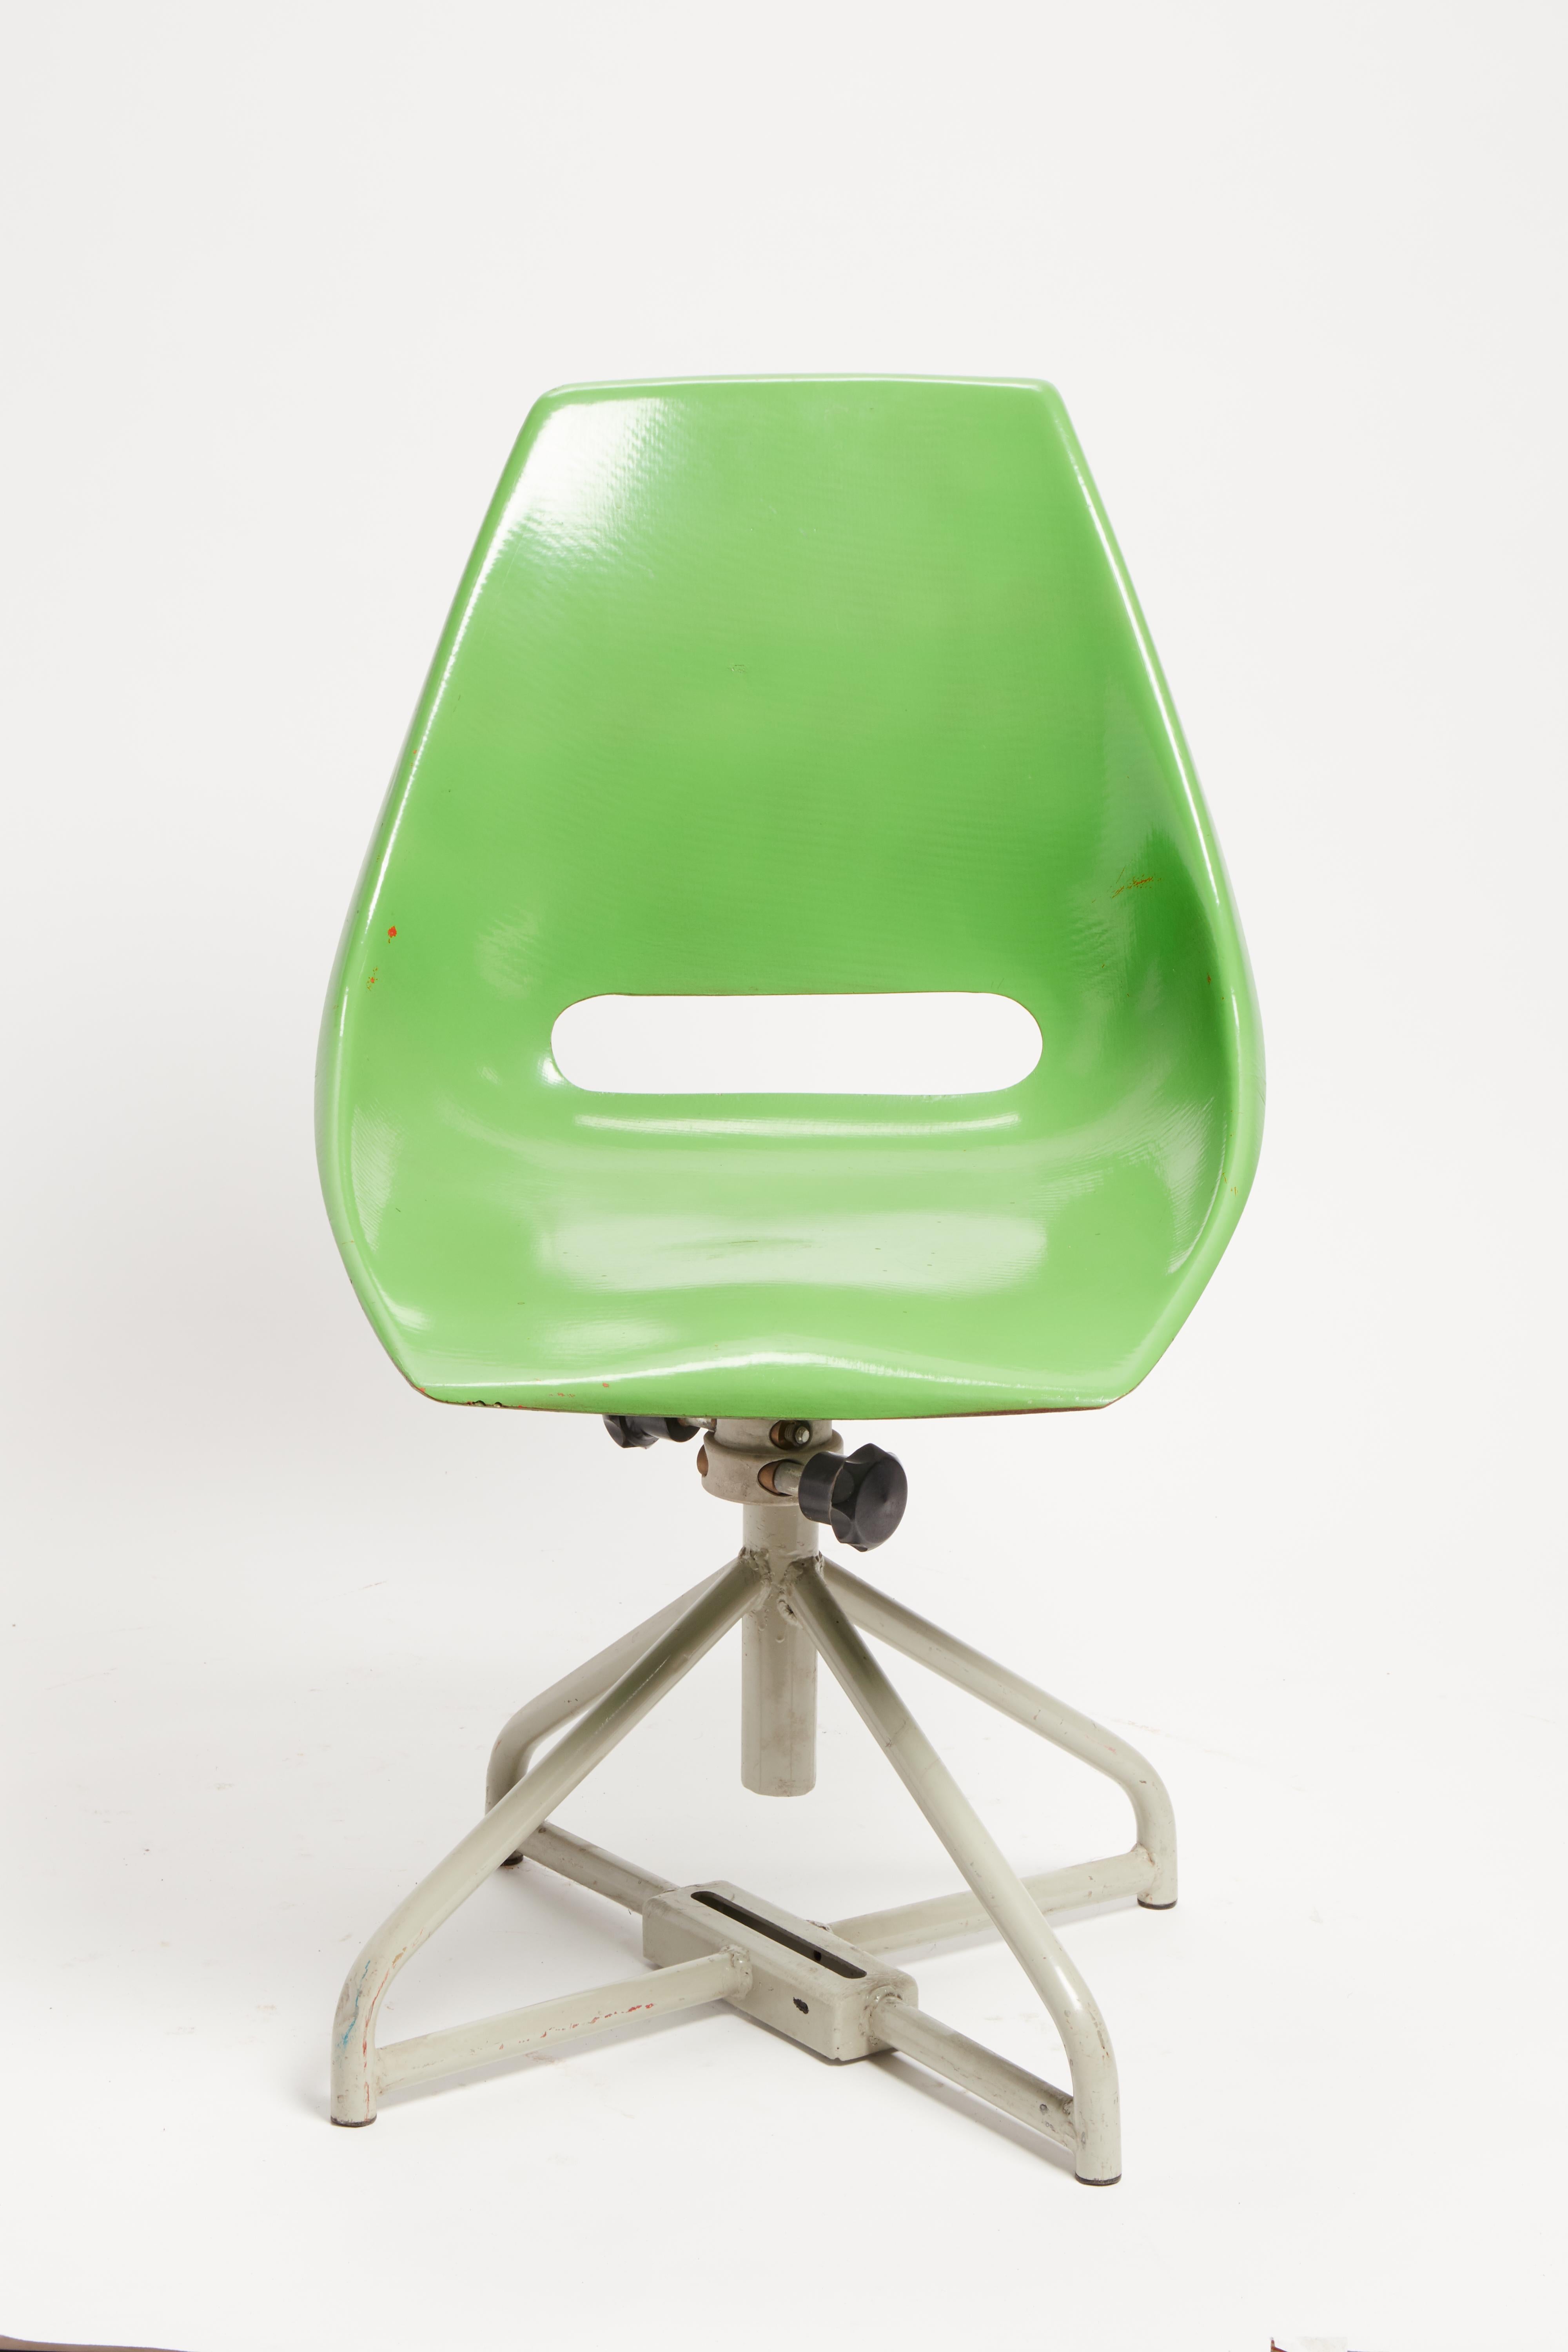 Multicolor Adjustable Fiberglass Chairs, Italy, 1950 For Sale 1